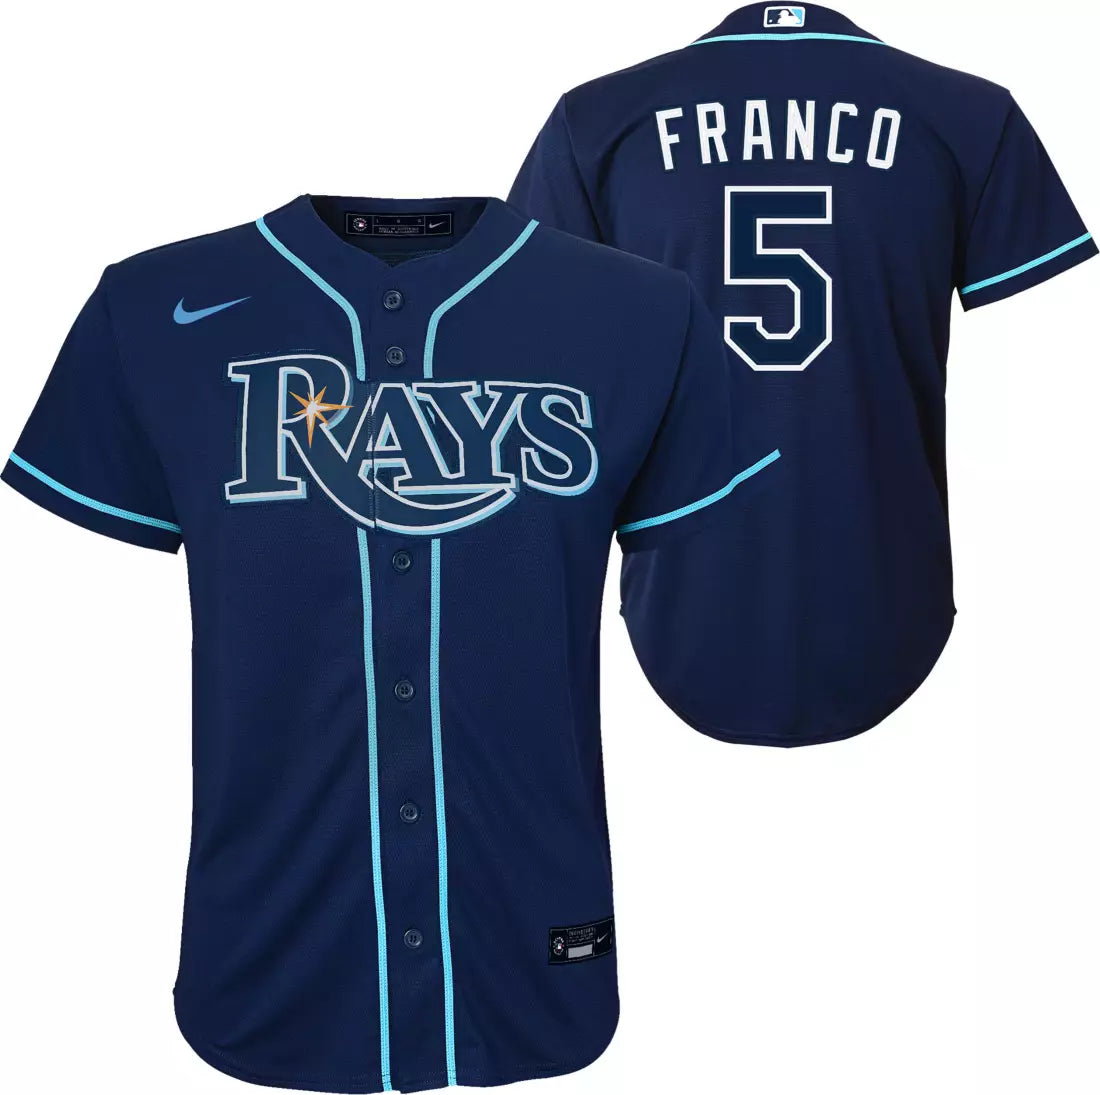 Wander Franco Tampa Bay Rays Jersey (Please Read Descriptions) for